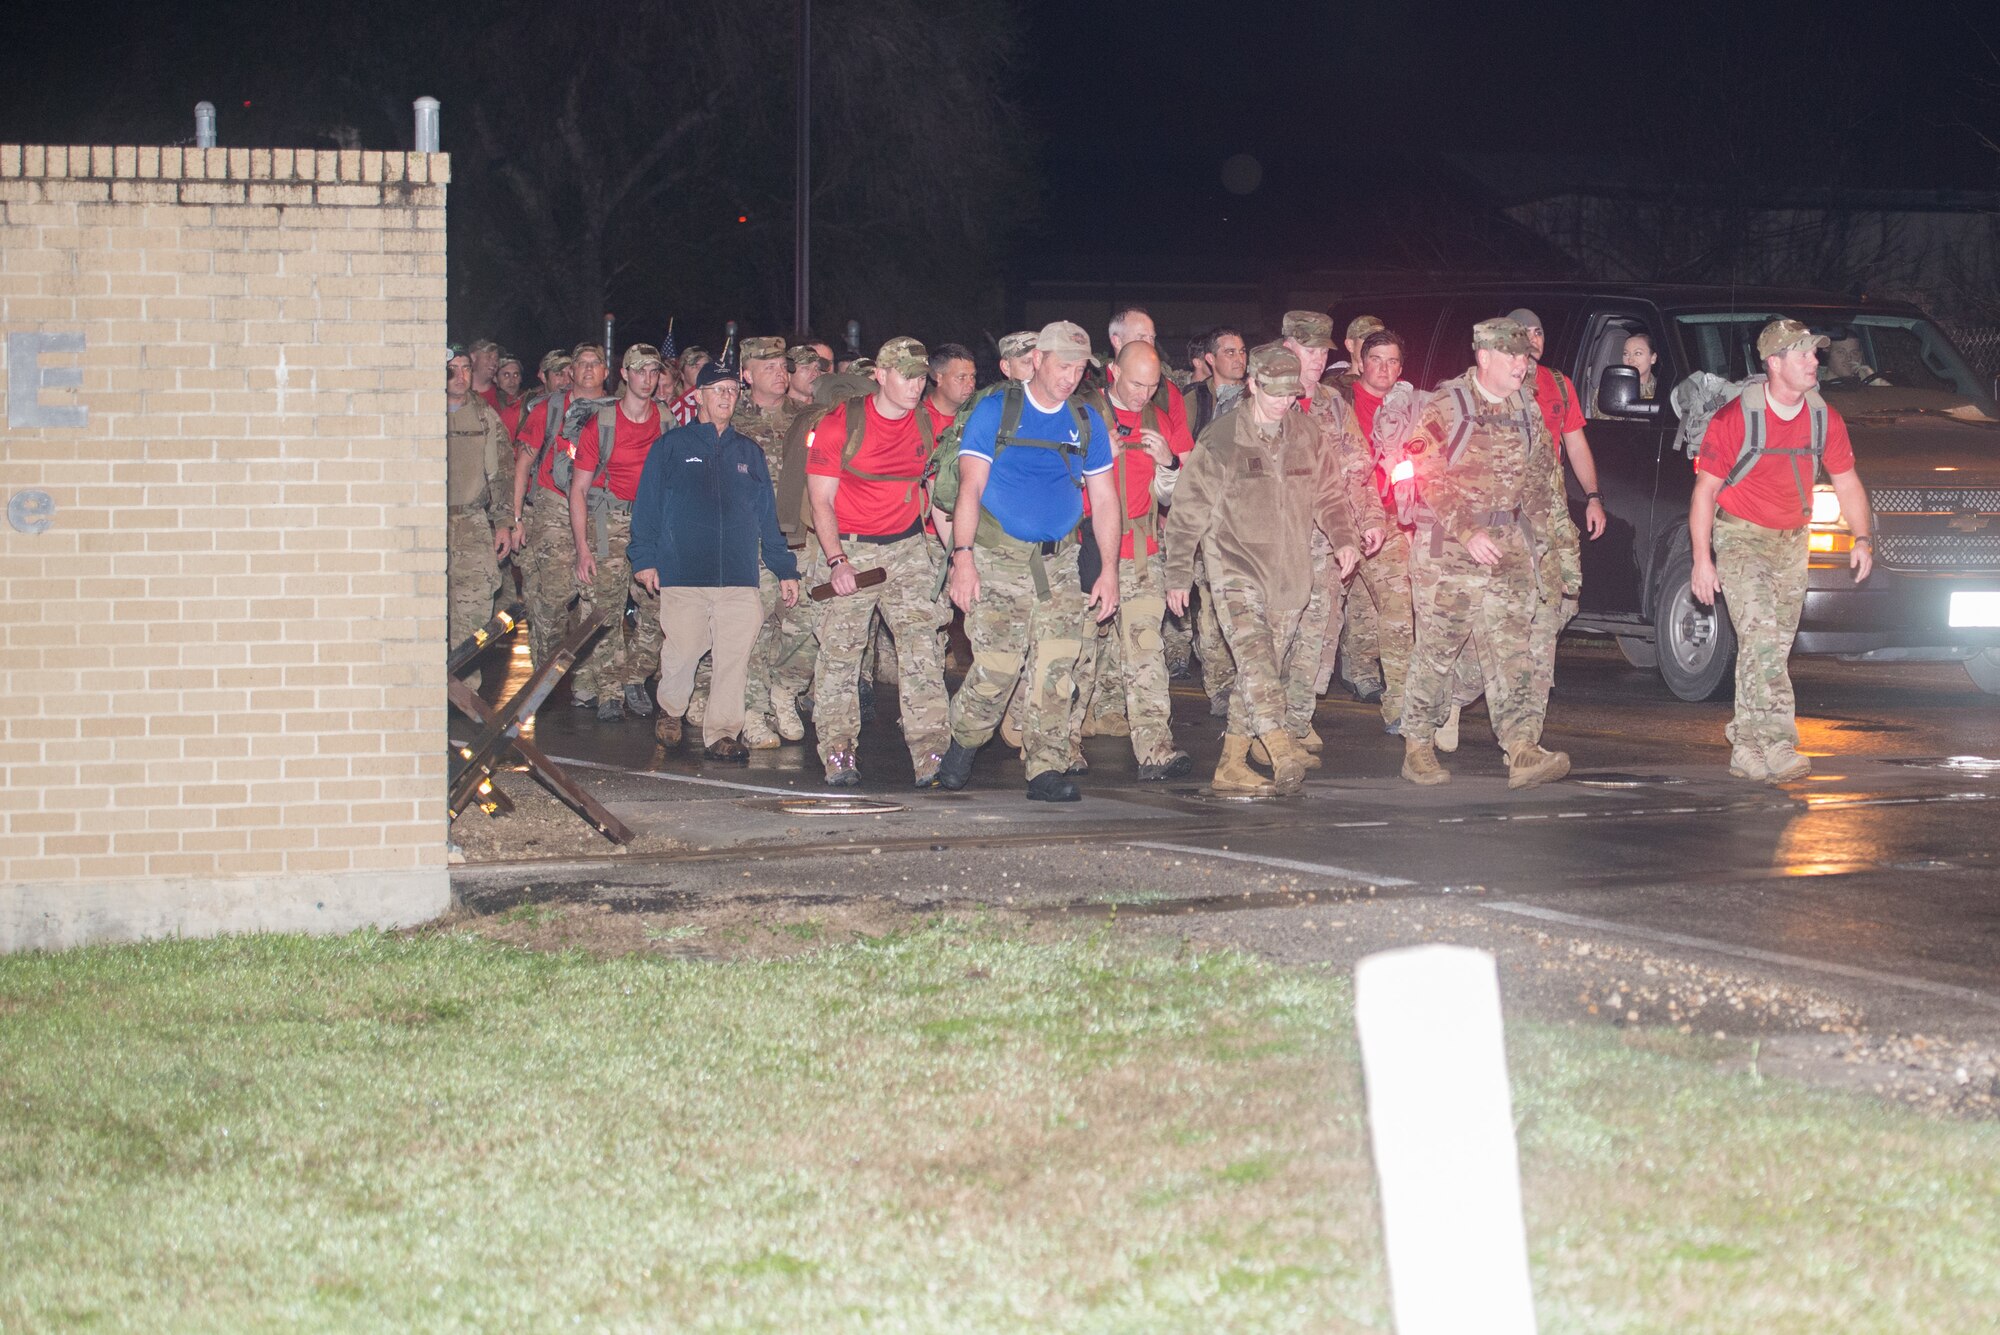 Hundreds of Special Tactics Airmen and Special Warfare trainees gathered early morning, Feb. 22, 2019, at the Medina Annex in Joint Base San Antonio-Lackland, Texas, to begin an 830-mile ruck march across five states in tribute to U.S. Air Force Staff Sgt. Dylan J. Elchin, along with 19 other Special Tactics Airmen, who have been killed in action since 9/11. The ruck march is projected to average about 12 miles per leg, alternating between the ten teams of two throughout the day ending at Hurlburt Field, Fla., March 4, 2019 at 1:00 p.m. EST. The 830-miles event will take over 11 days averaging 70 miles each day. (U.S. Air Force photo by Andrew Patterson)